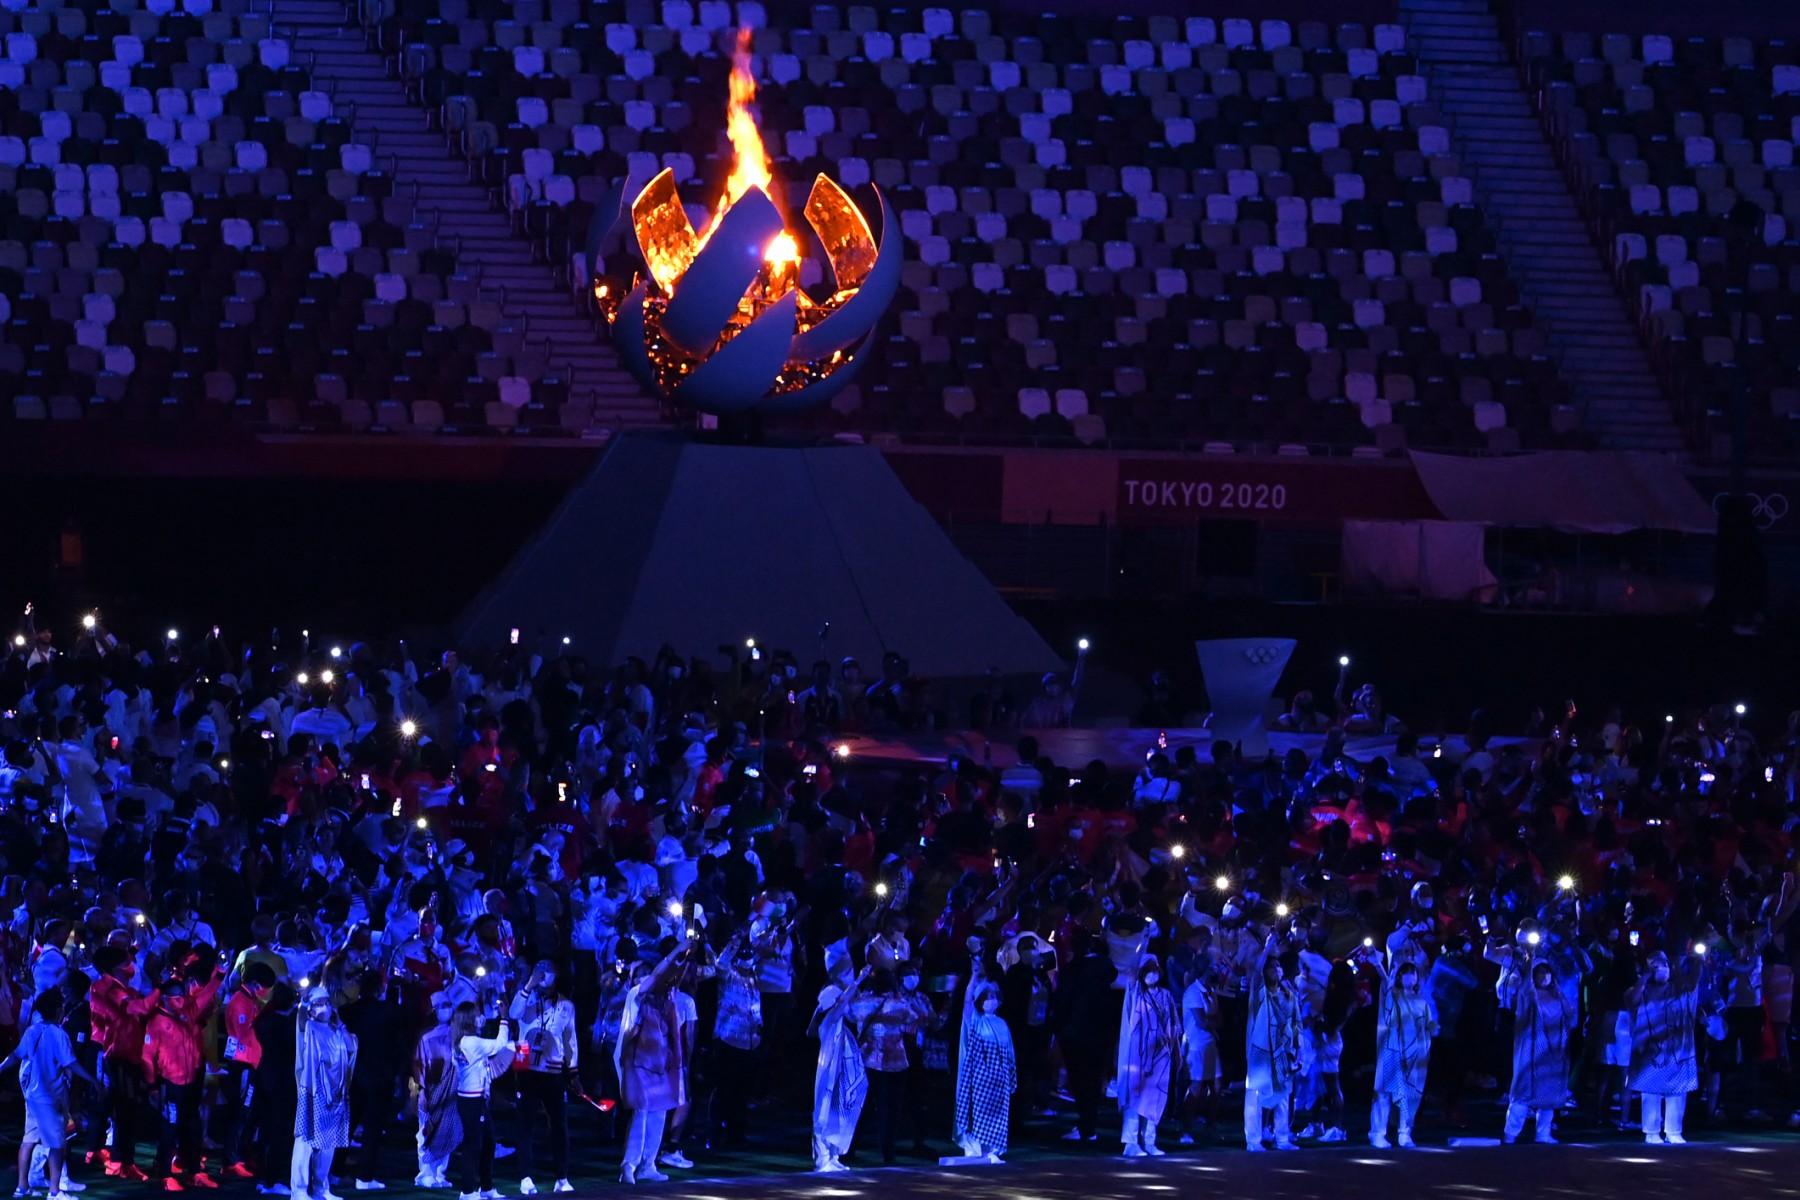 Athletes gather next to the Olympic Cauldron during the closing ceremony of the Tokyo 2020 Olympic Games, at the Olympic Stadium, in Tokyo, on Aug 8, 2021. Photo: AFP